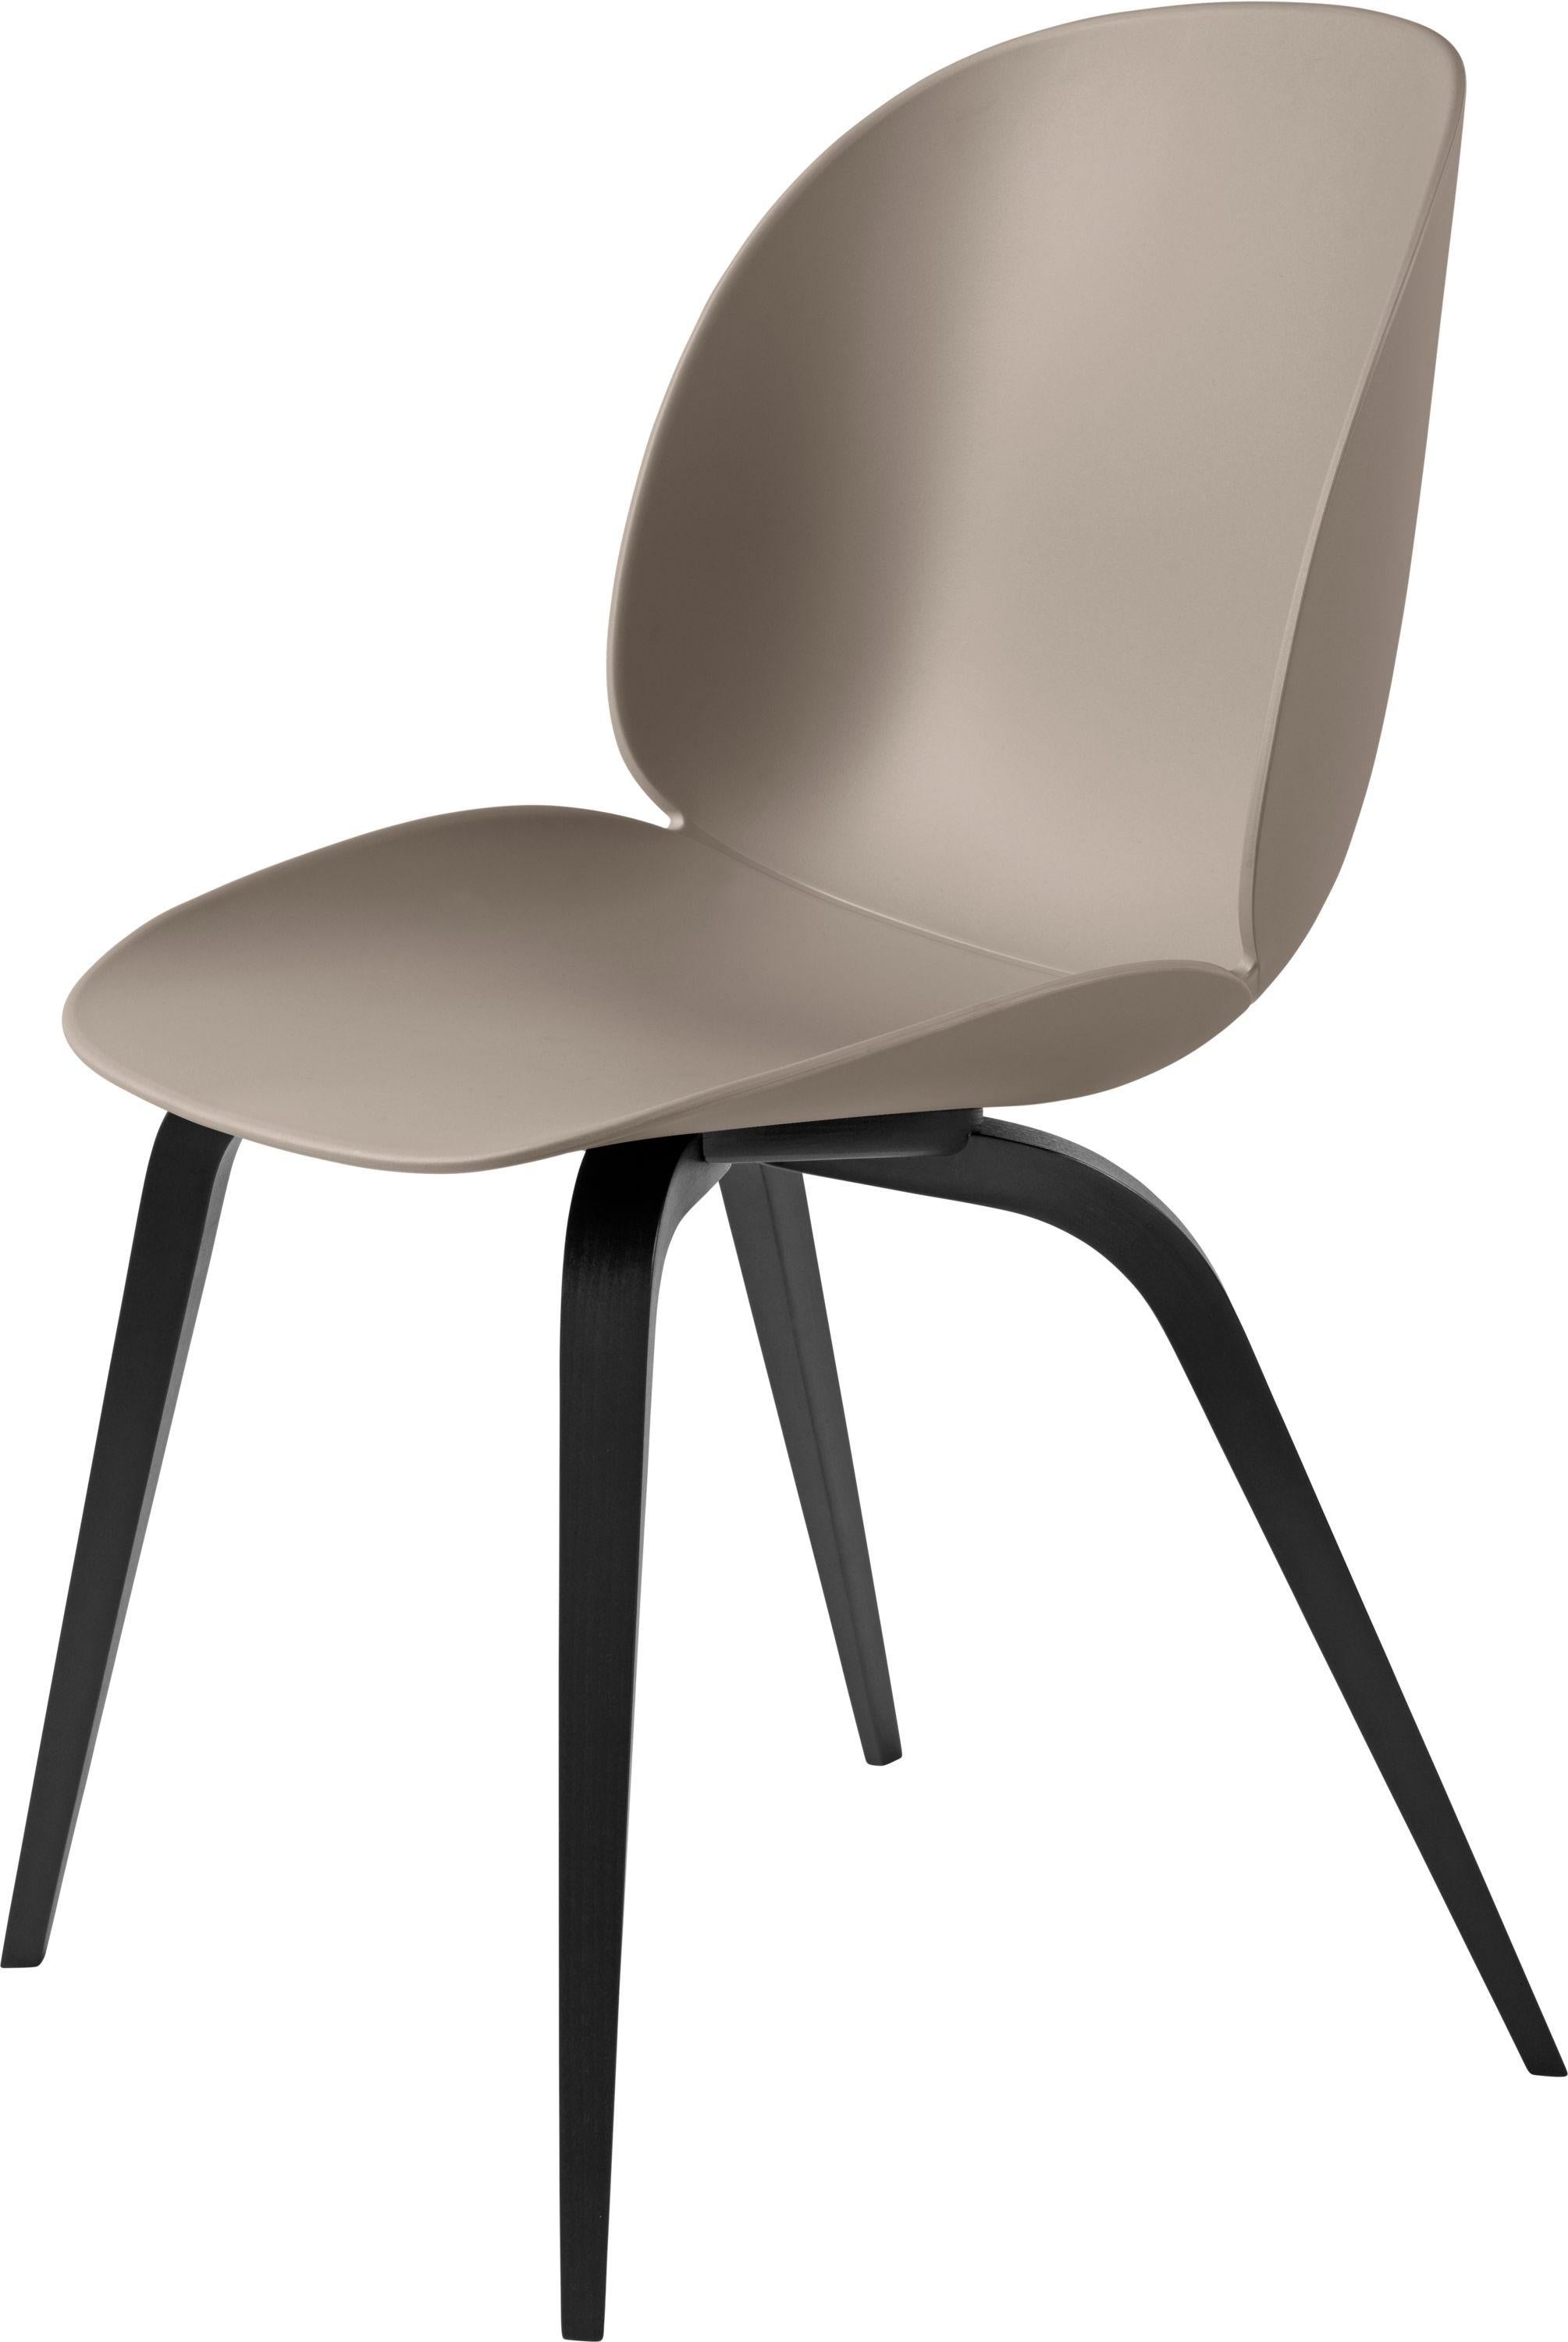 Danish GamFratesi 'Beetle' Dining Chair with Black Stained Beech Conic Base